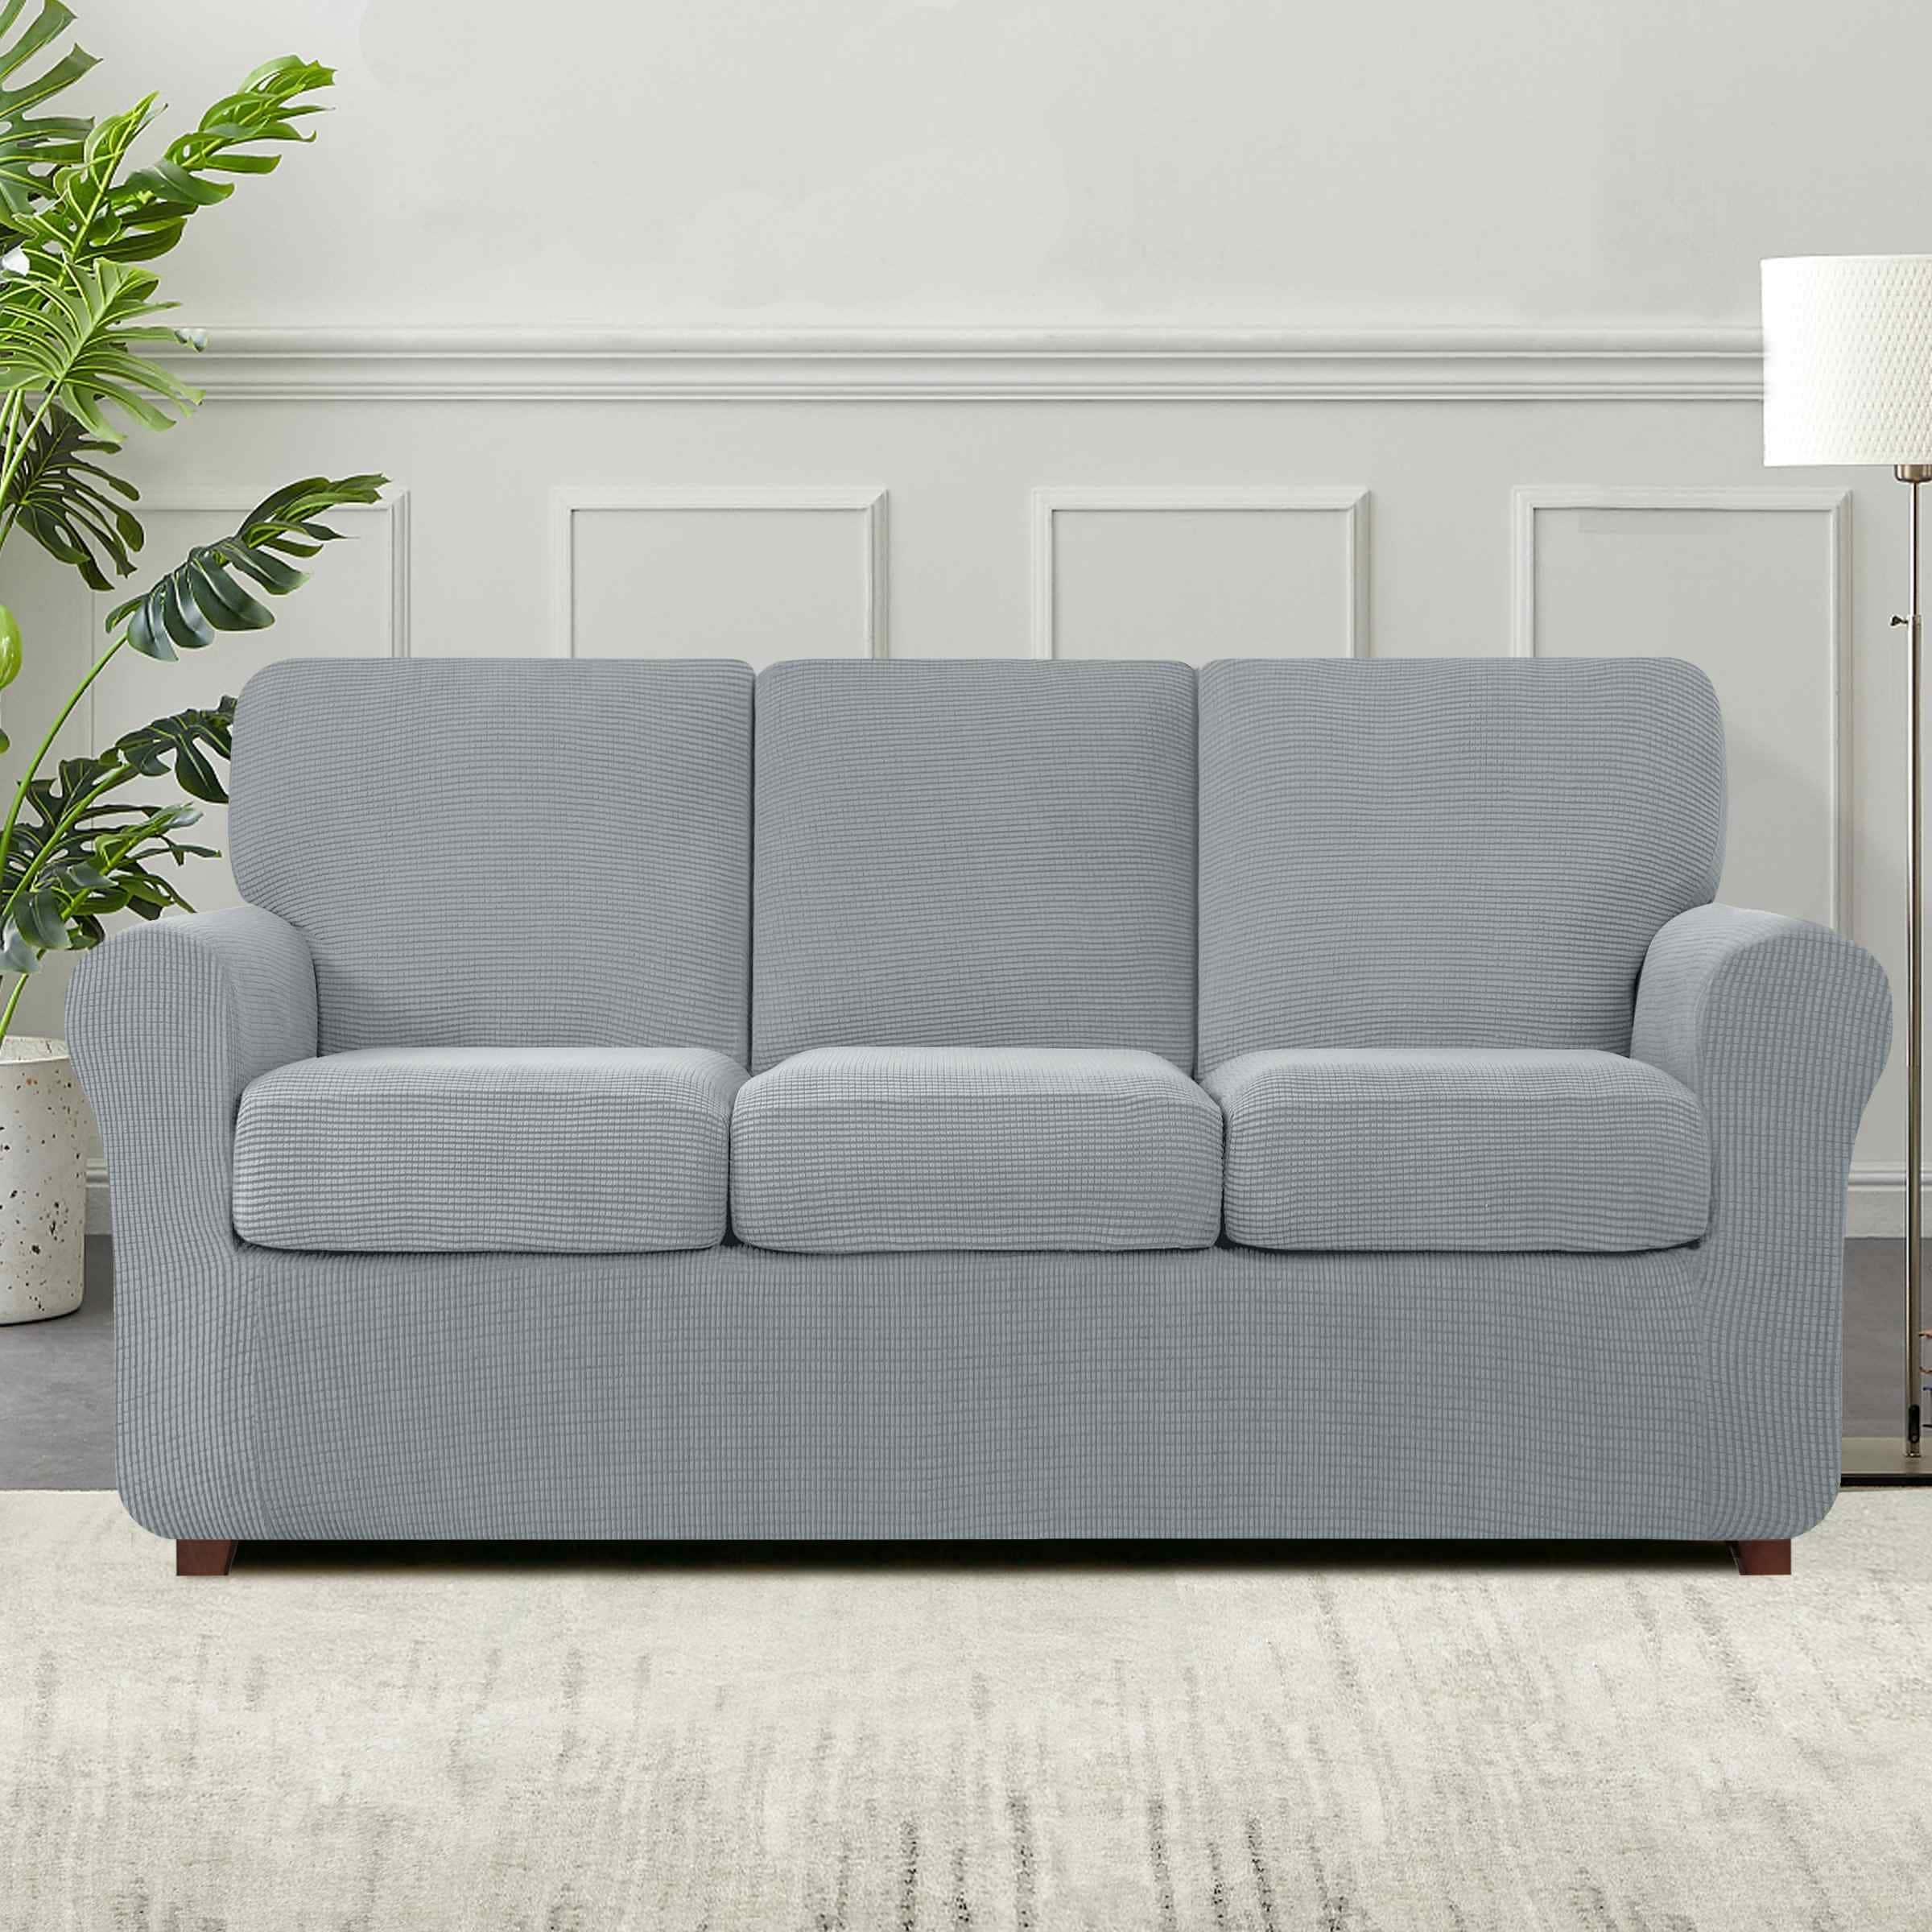 U shaped sectional couch cover: An Incredibly Easy Method That Works For All